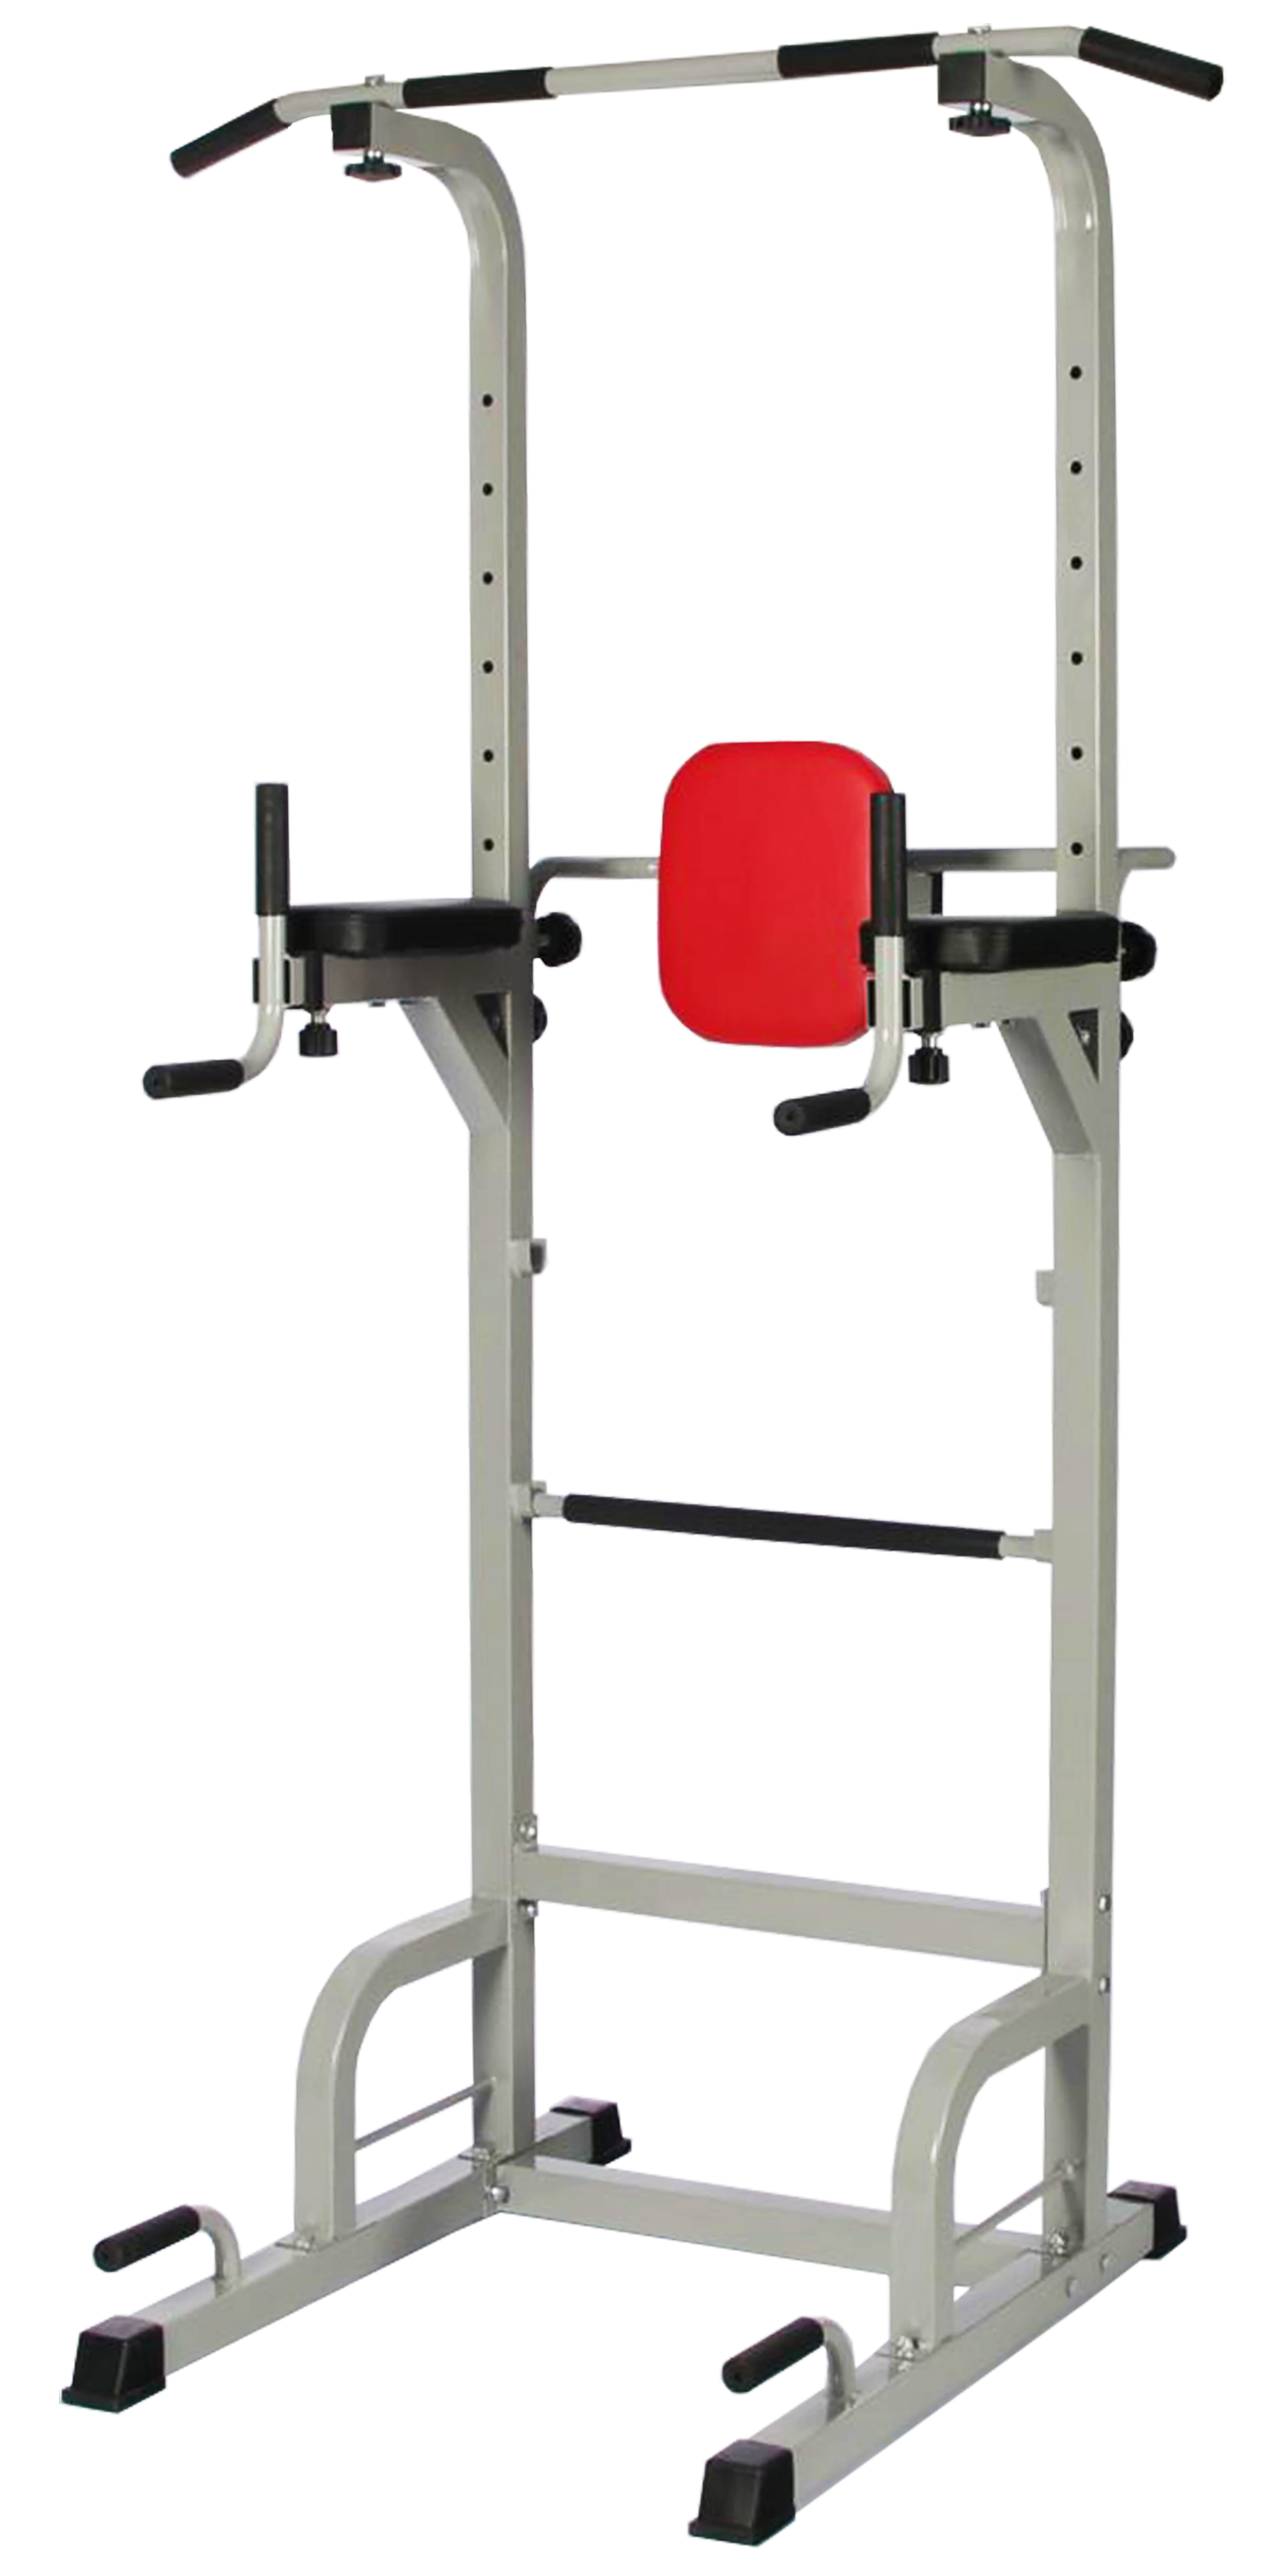 Everyday Essentials Power Tower with Push-up, Pull-up and Workout Dip Station for Home Gym Strength Training - image 1 of 6